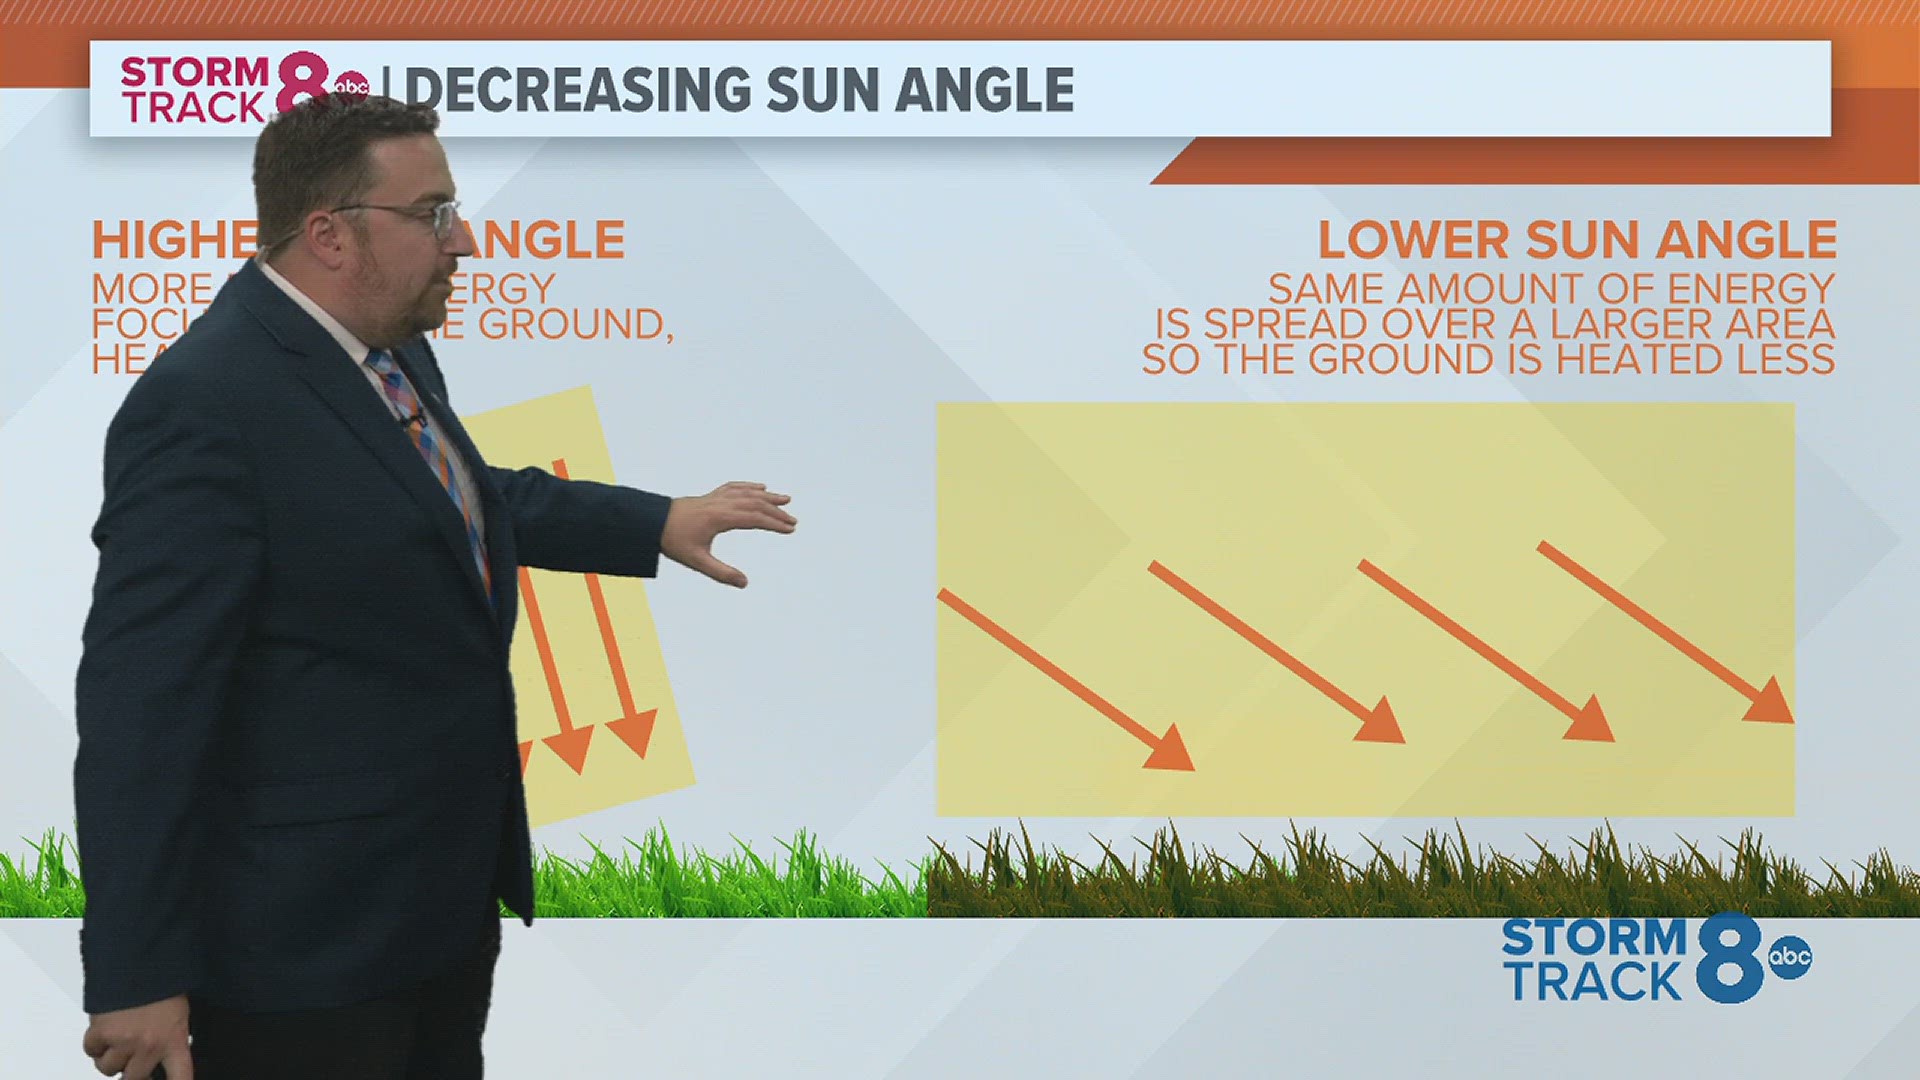 The angle of the sun plays a huge role in how hot or cold our temperatures can get. Here's why.